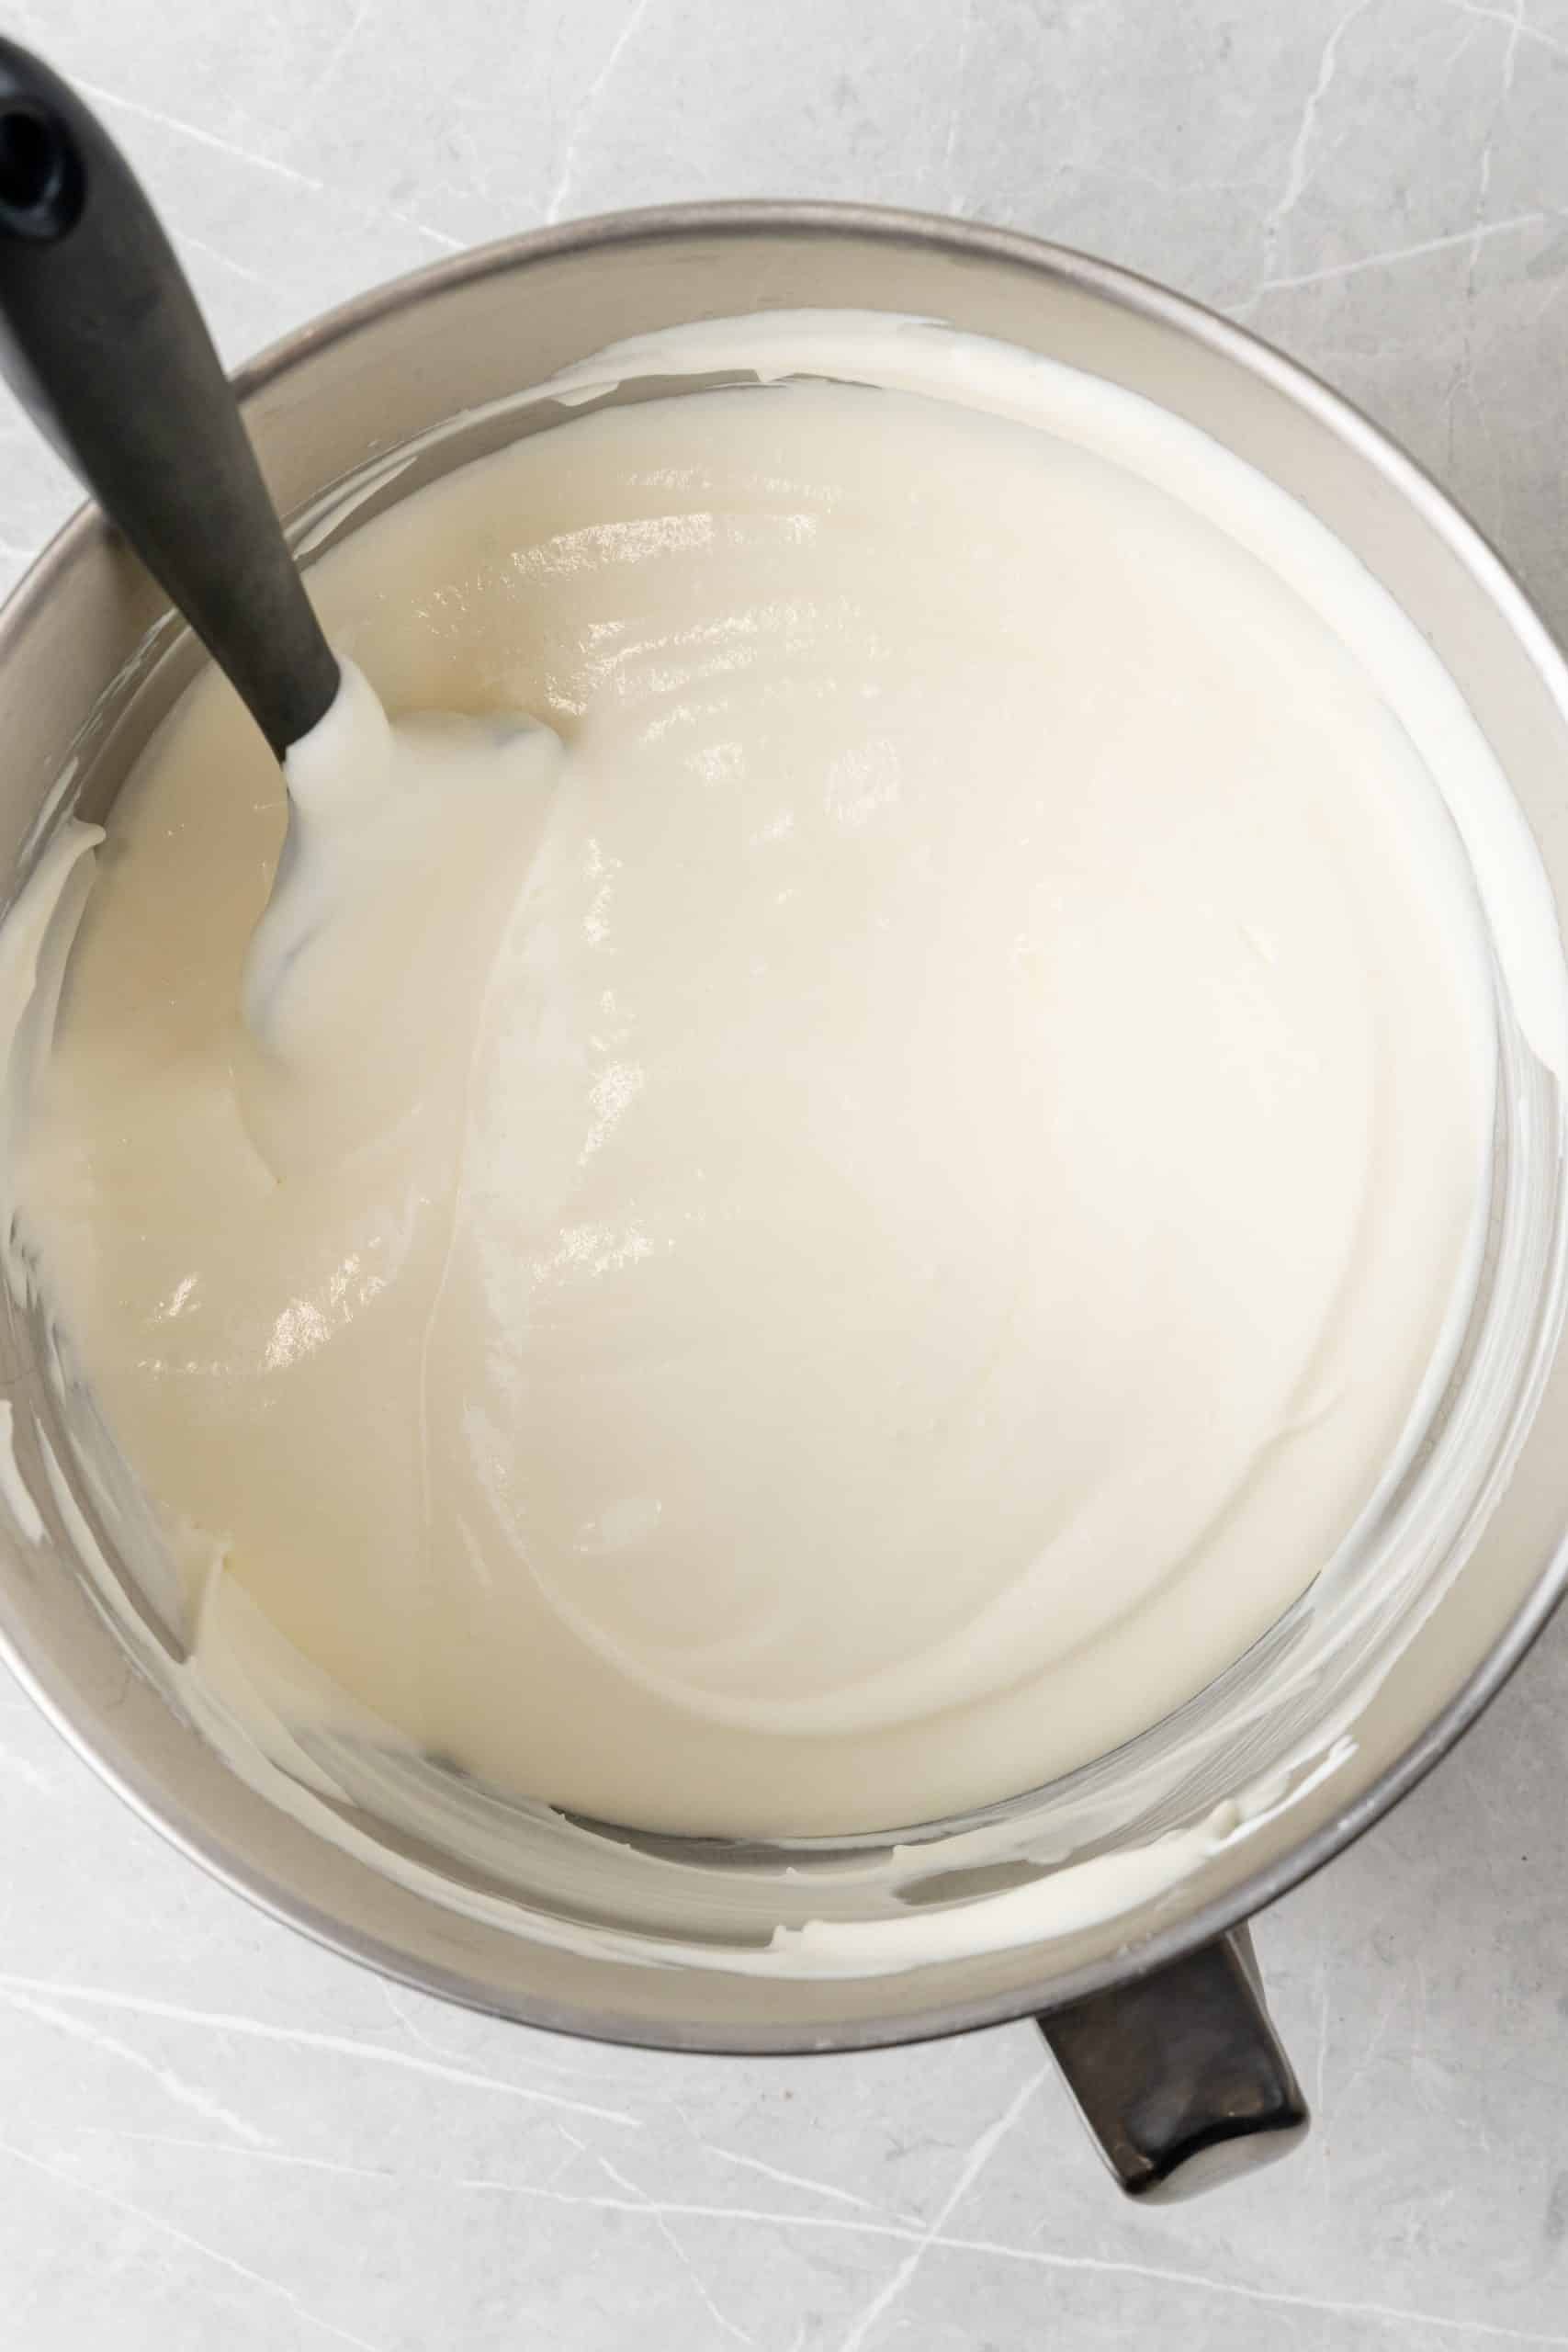 sweetened condensed milk mixed with whipped cream in a large metal mixing bowl